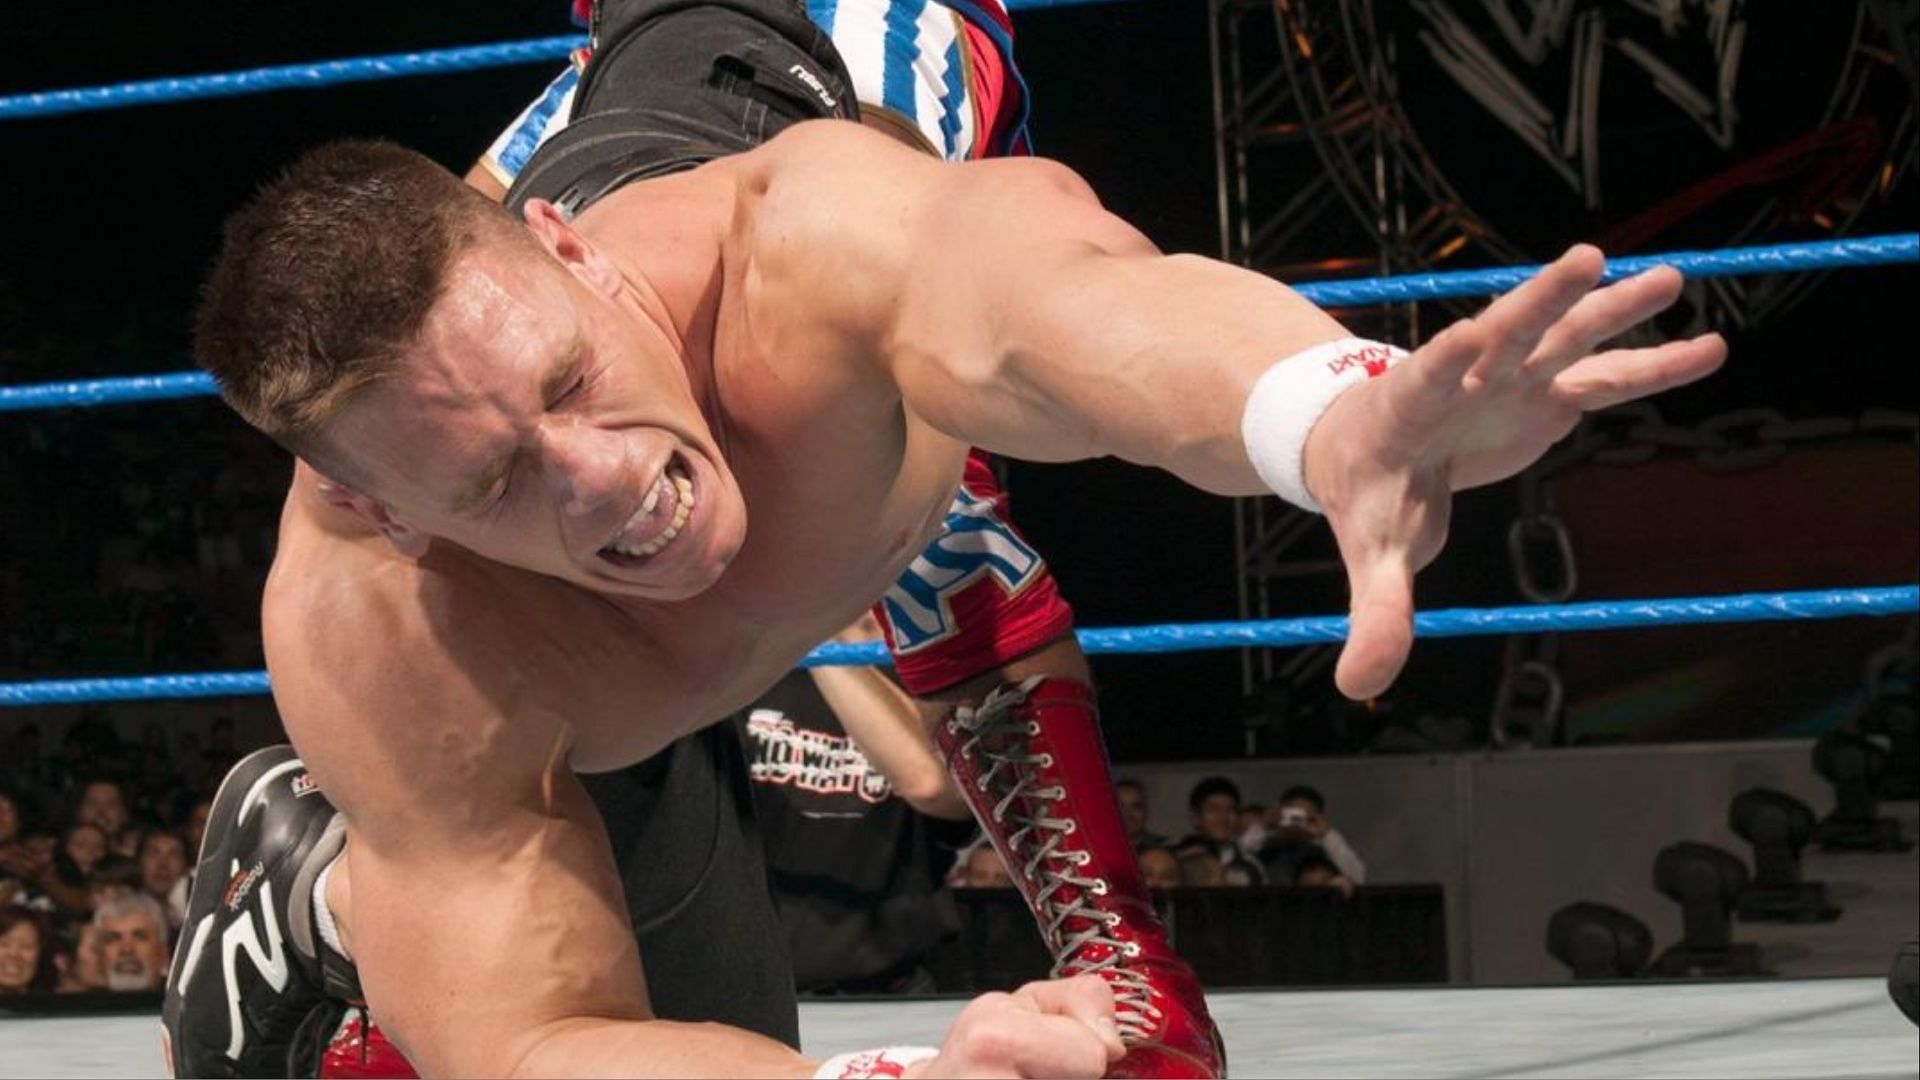 John Cena struggles to get out of submission